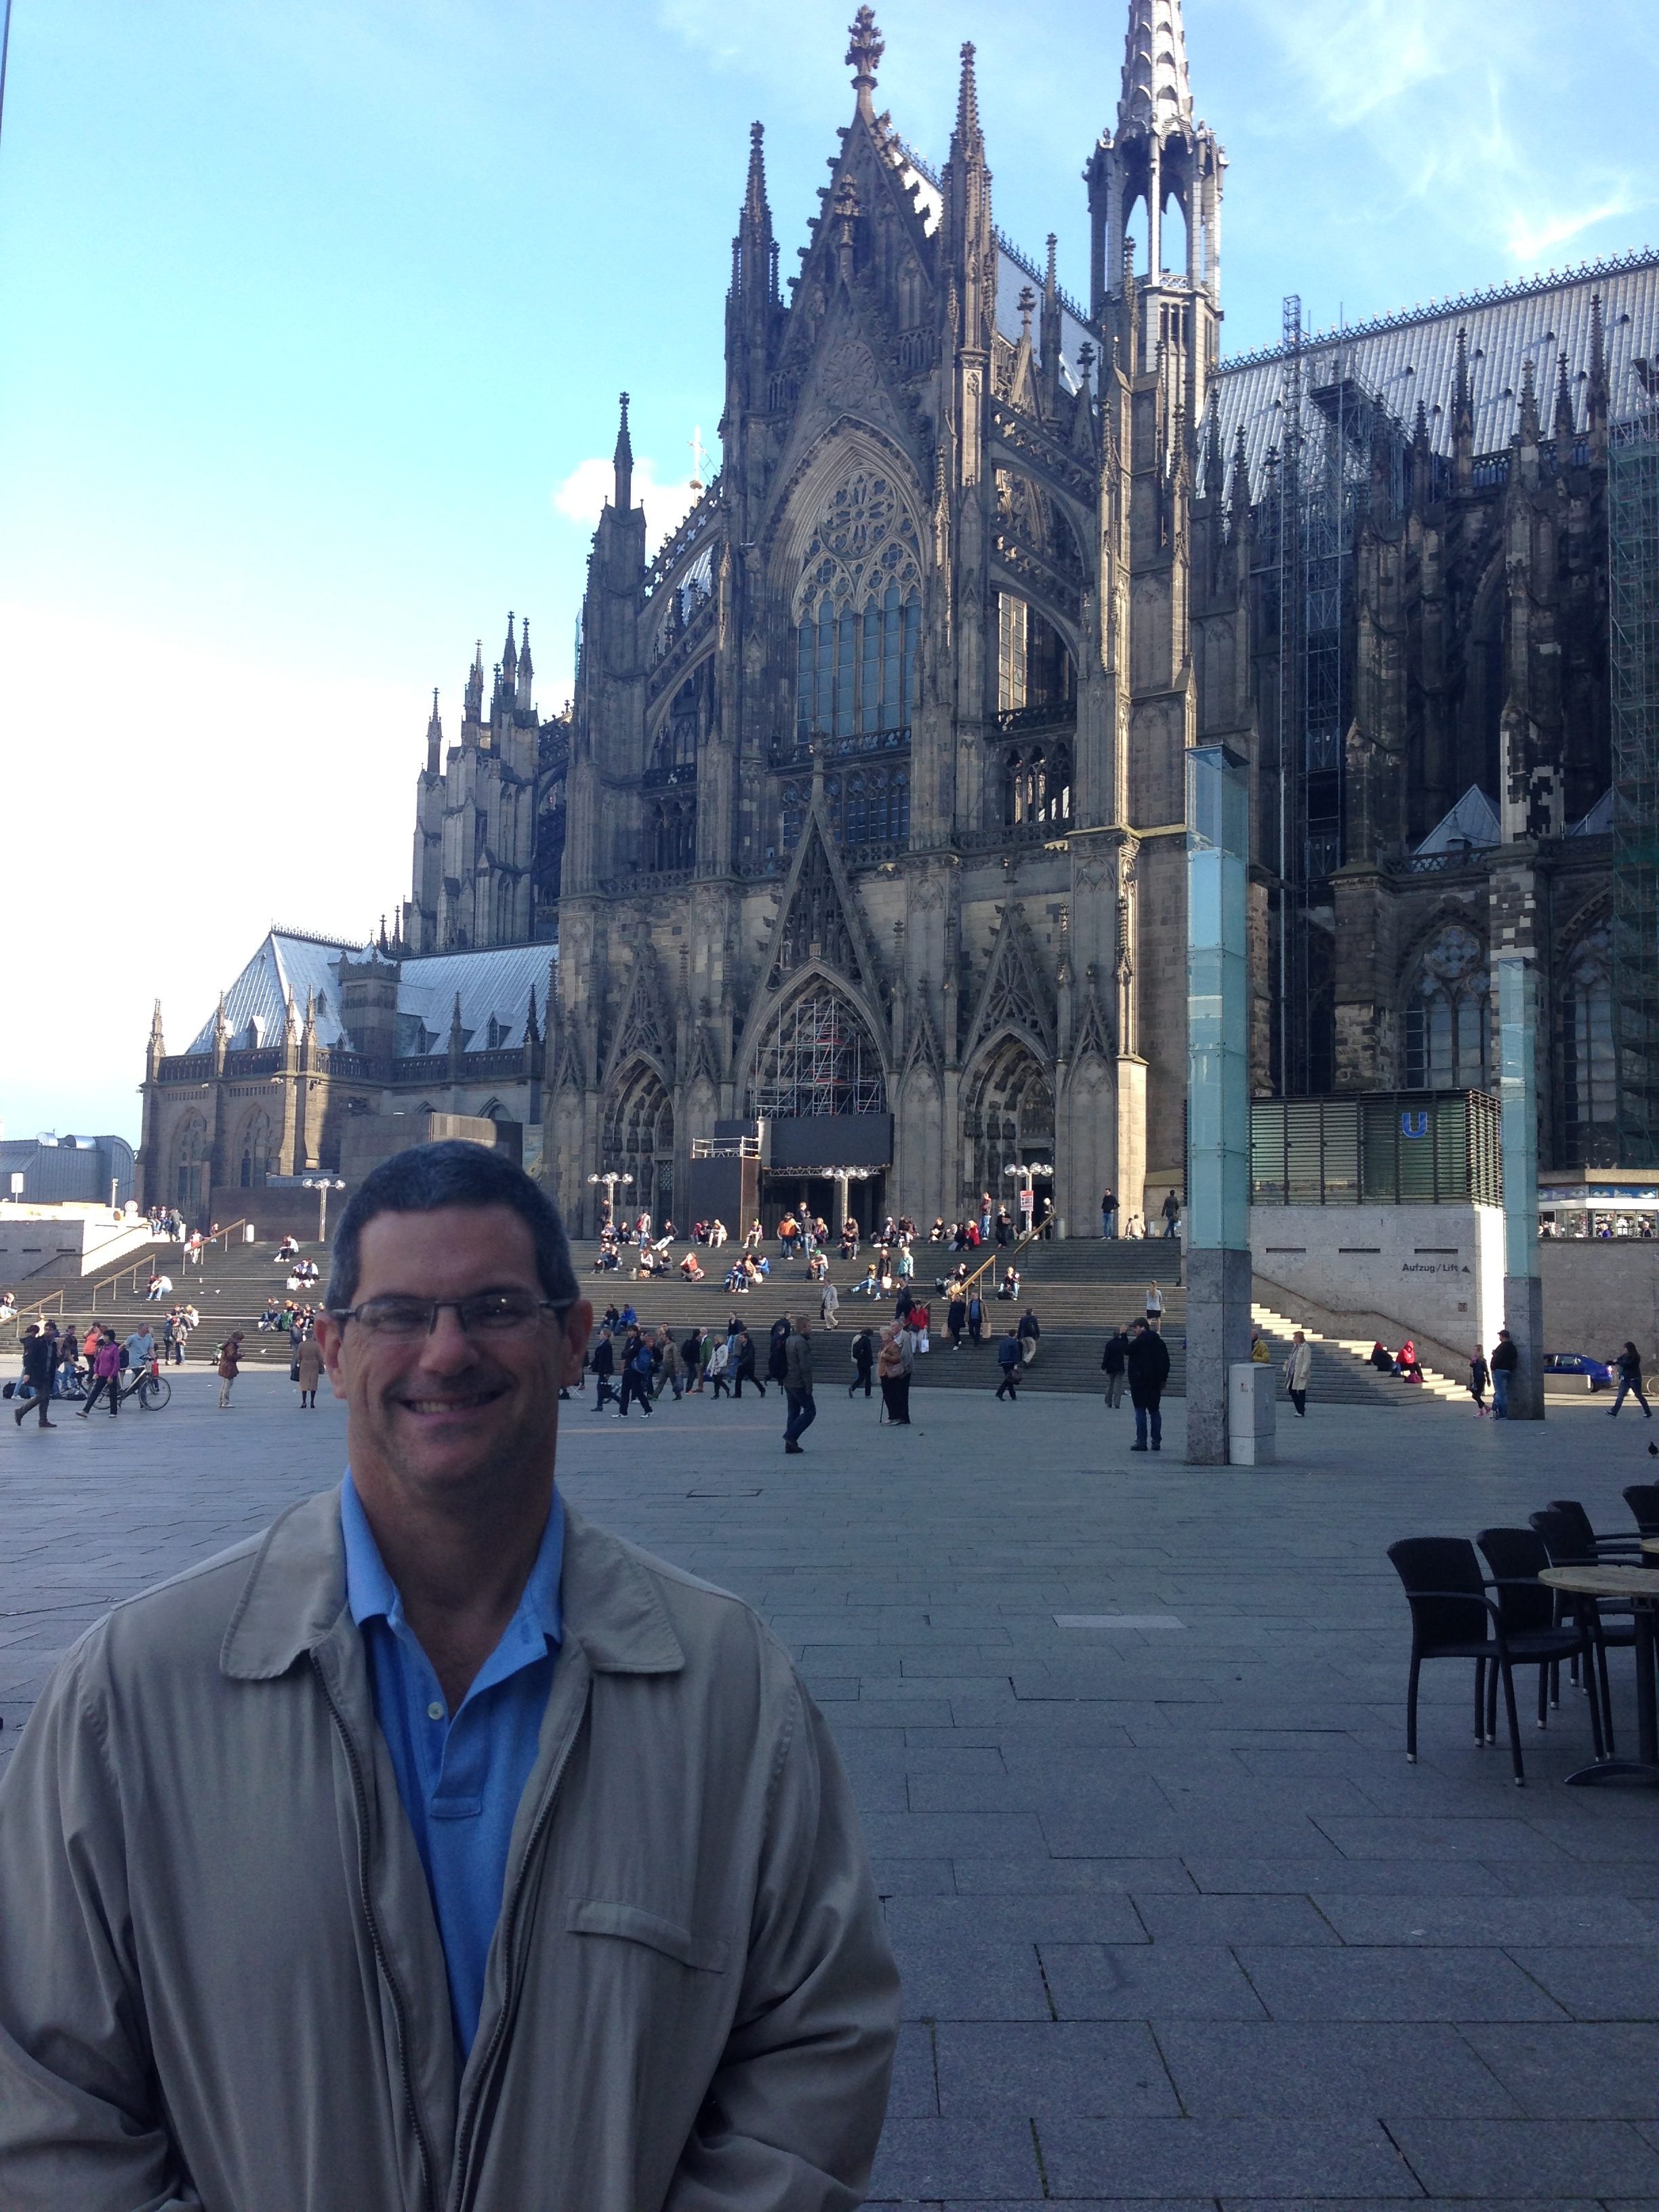 Cologne Cathedral next to the square outside the central train station